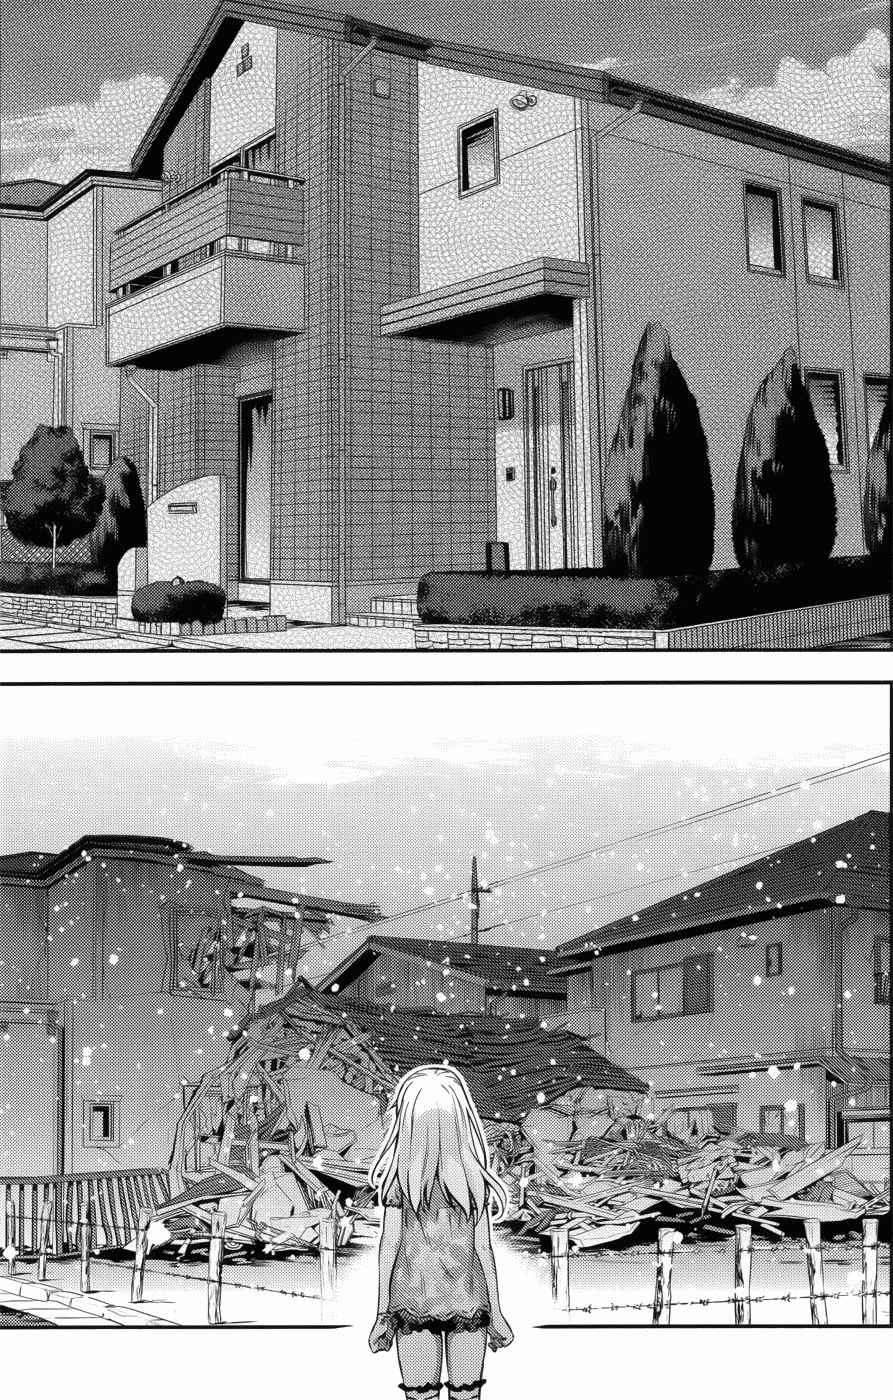 Fate/kaleid liner PRISMA☆ILLYA 3rei!! Vol. 1 Ch. 1 A City Submerged in Silver